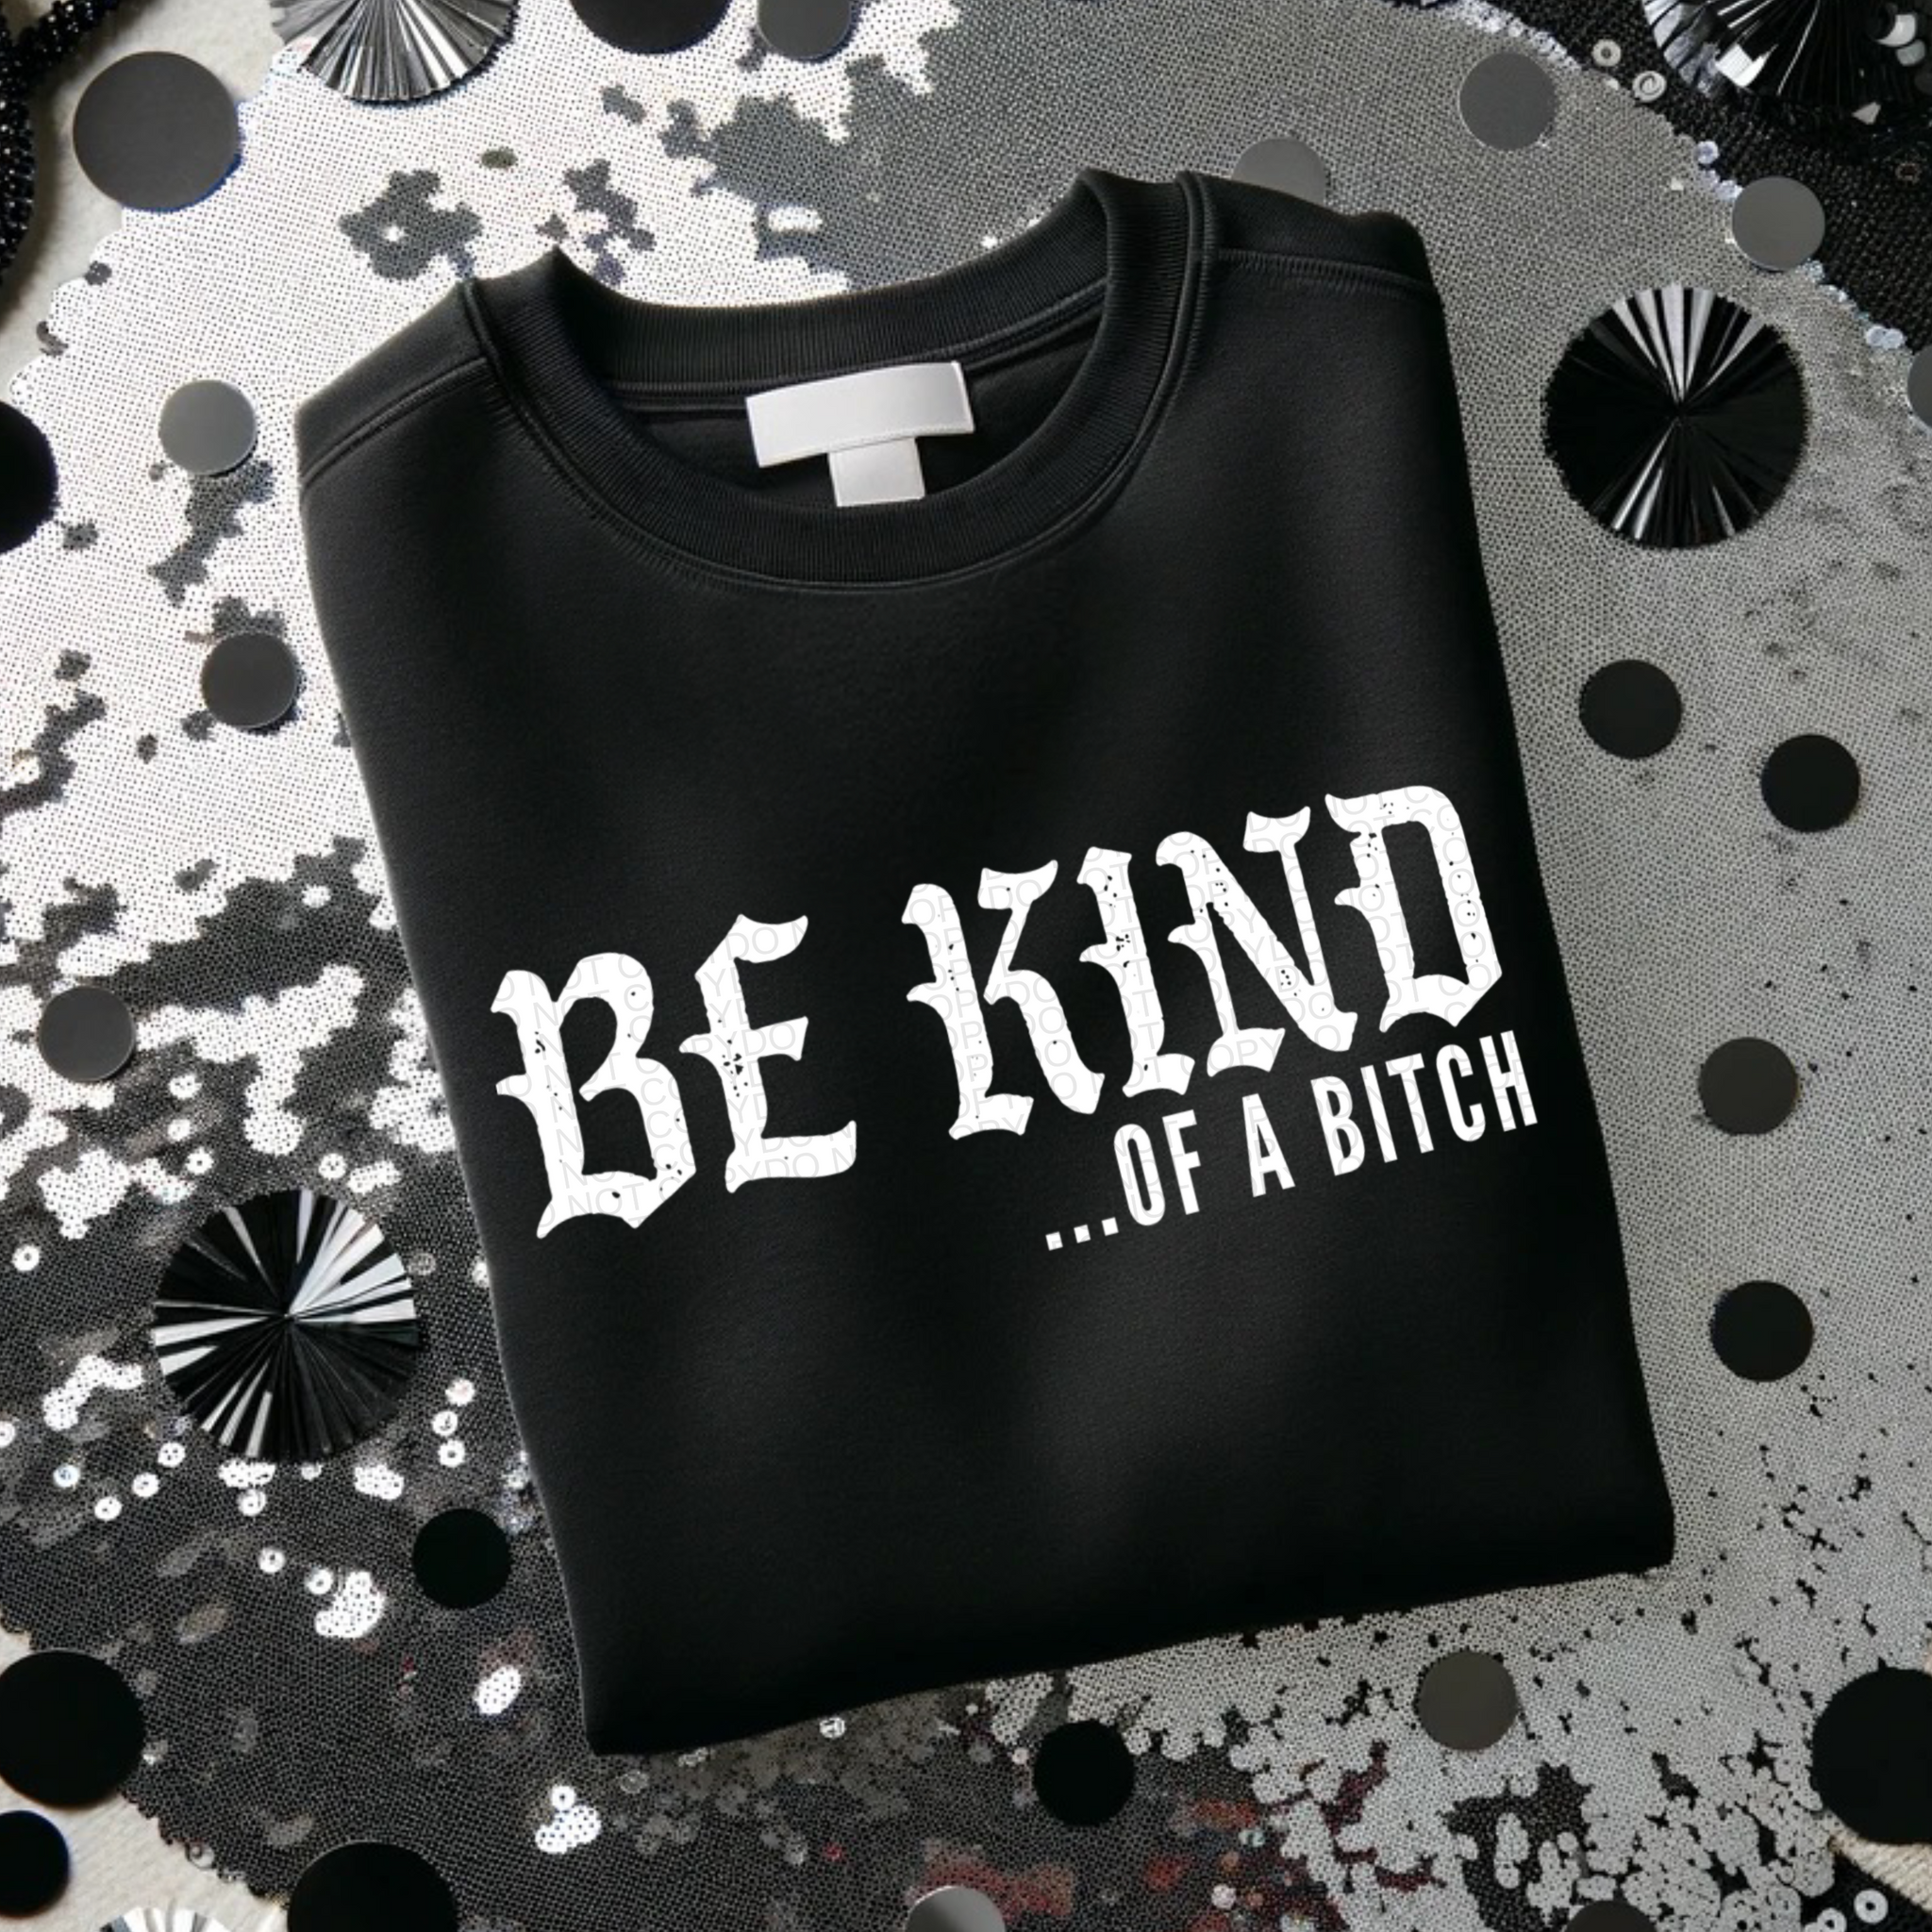 Be Kind of a Bitch Black Crewneck Sweatshirt With White Ink